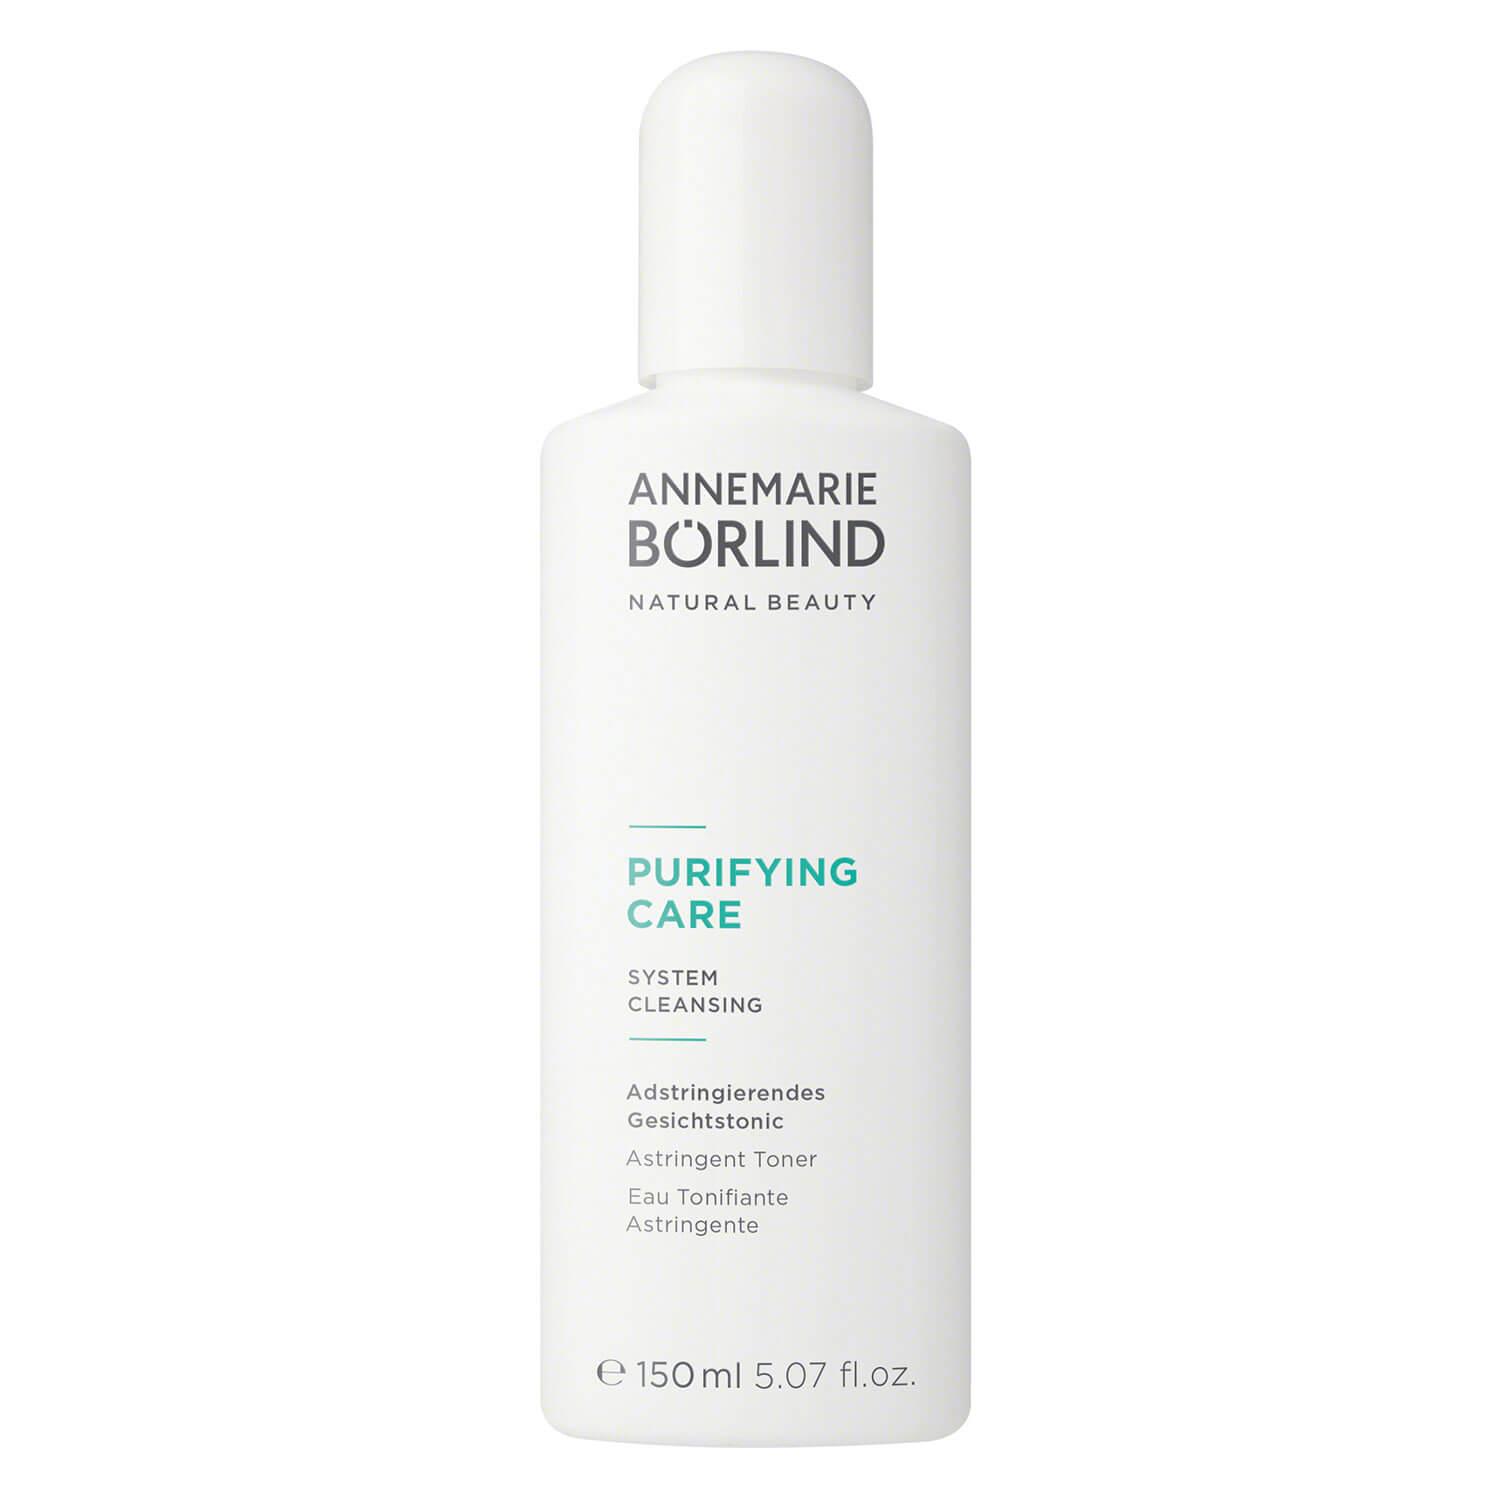 Purifying Care - Adstringierendes Gesichtstonic